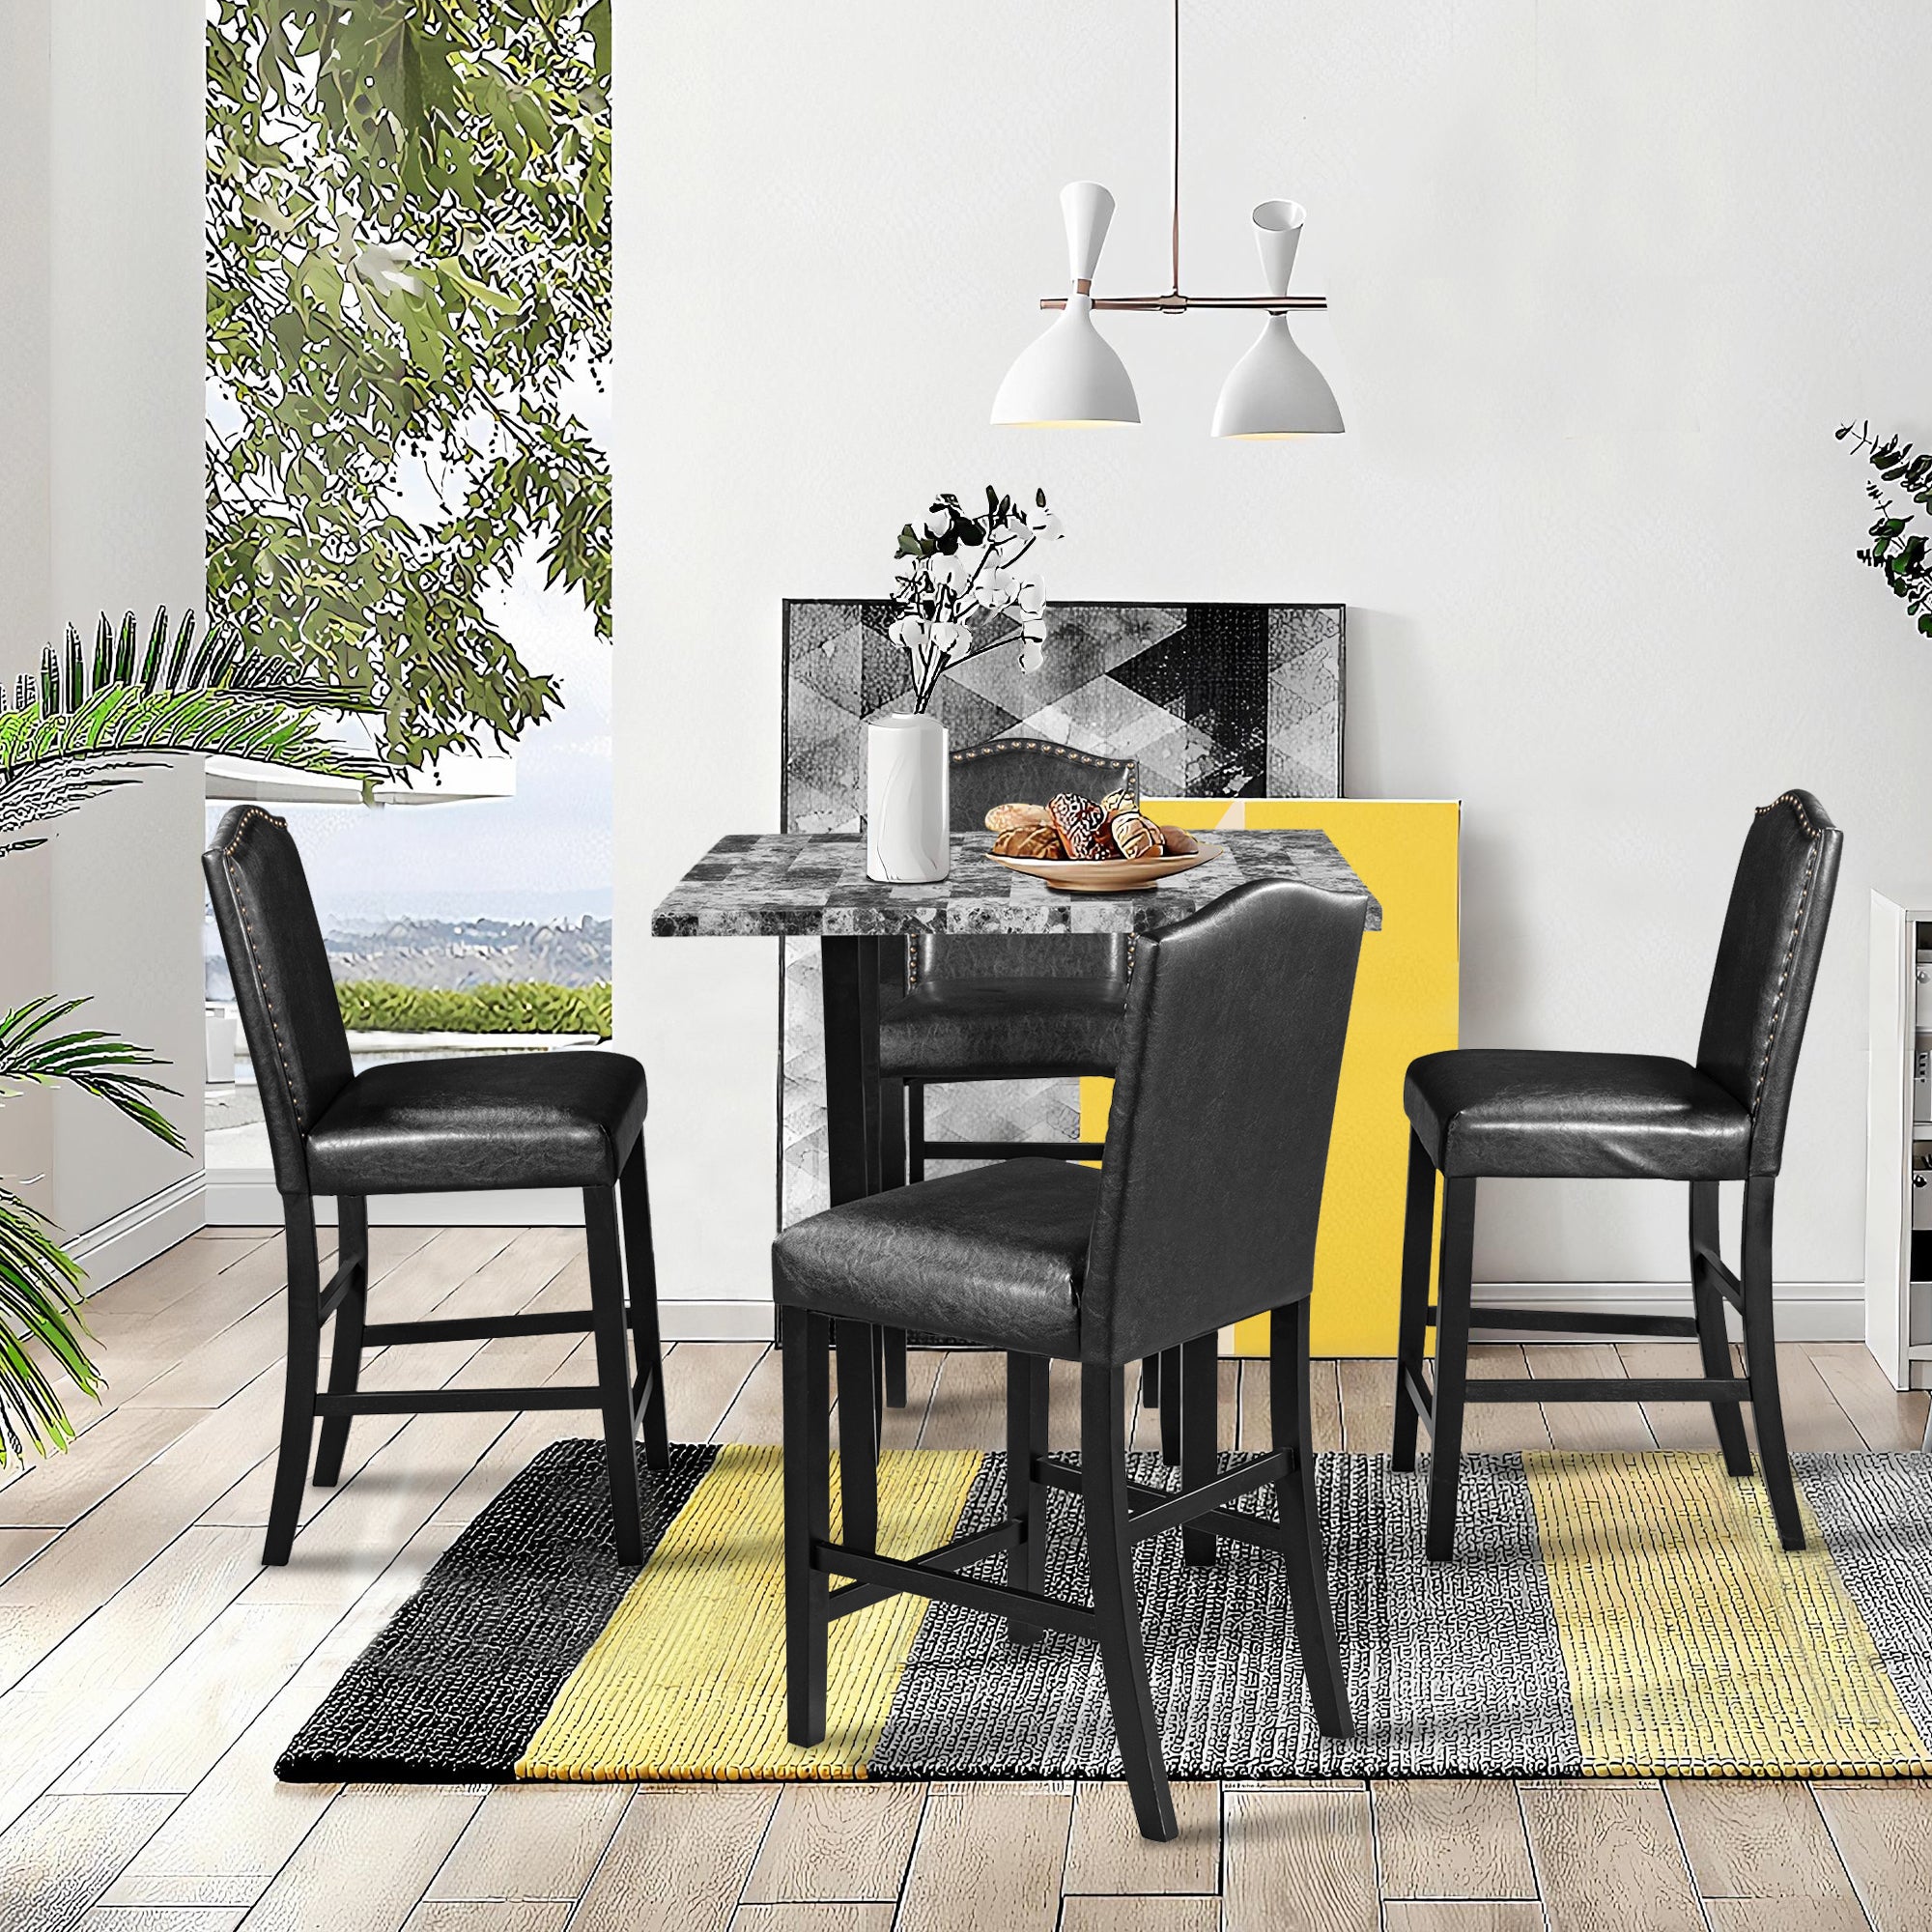 TOPMAX 5 Piece Dining Set with Matching Chairs and Bottom Shelf for Dining Room Chair (Black) ,Table (Gray)